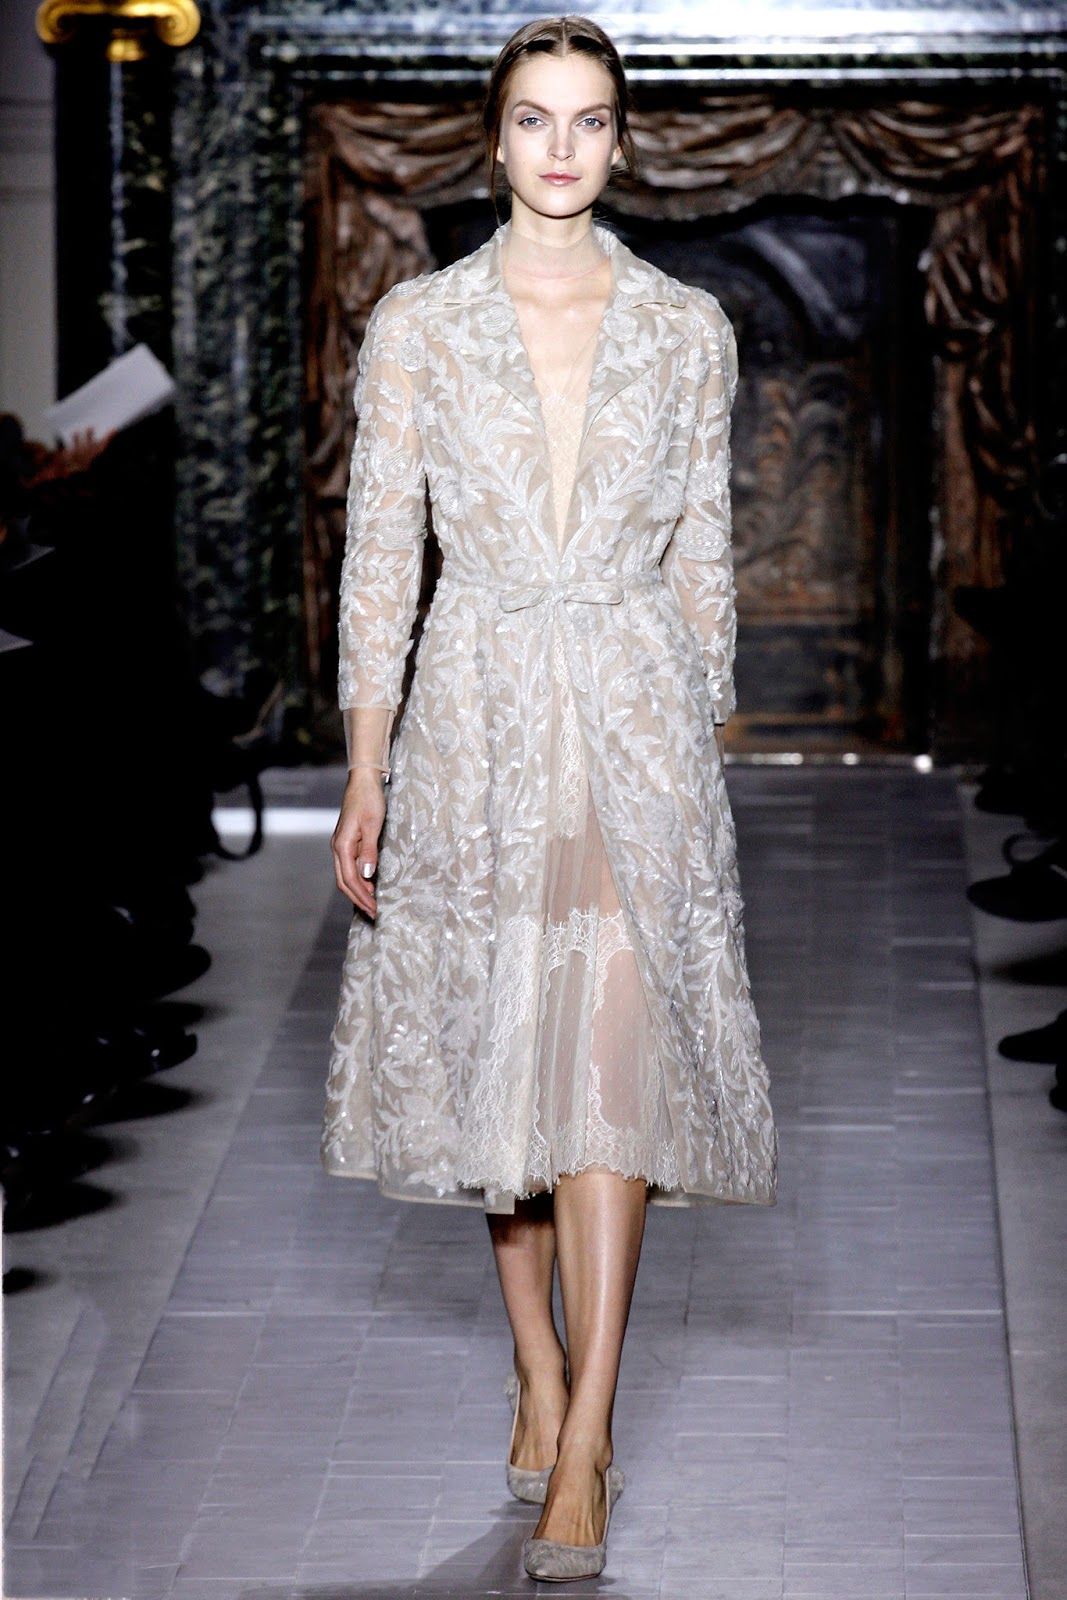 Valentino Haute Couture Spring/Summer 2013 collection | Fab Fashion Fix